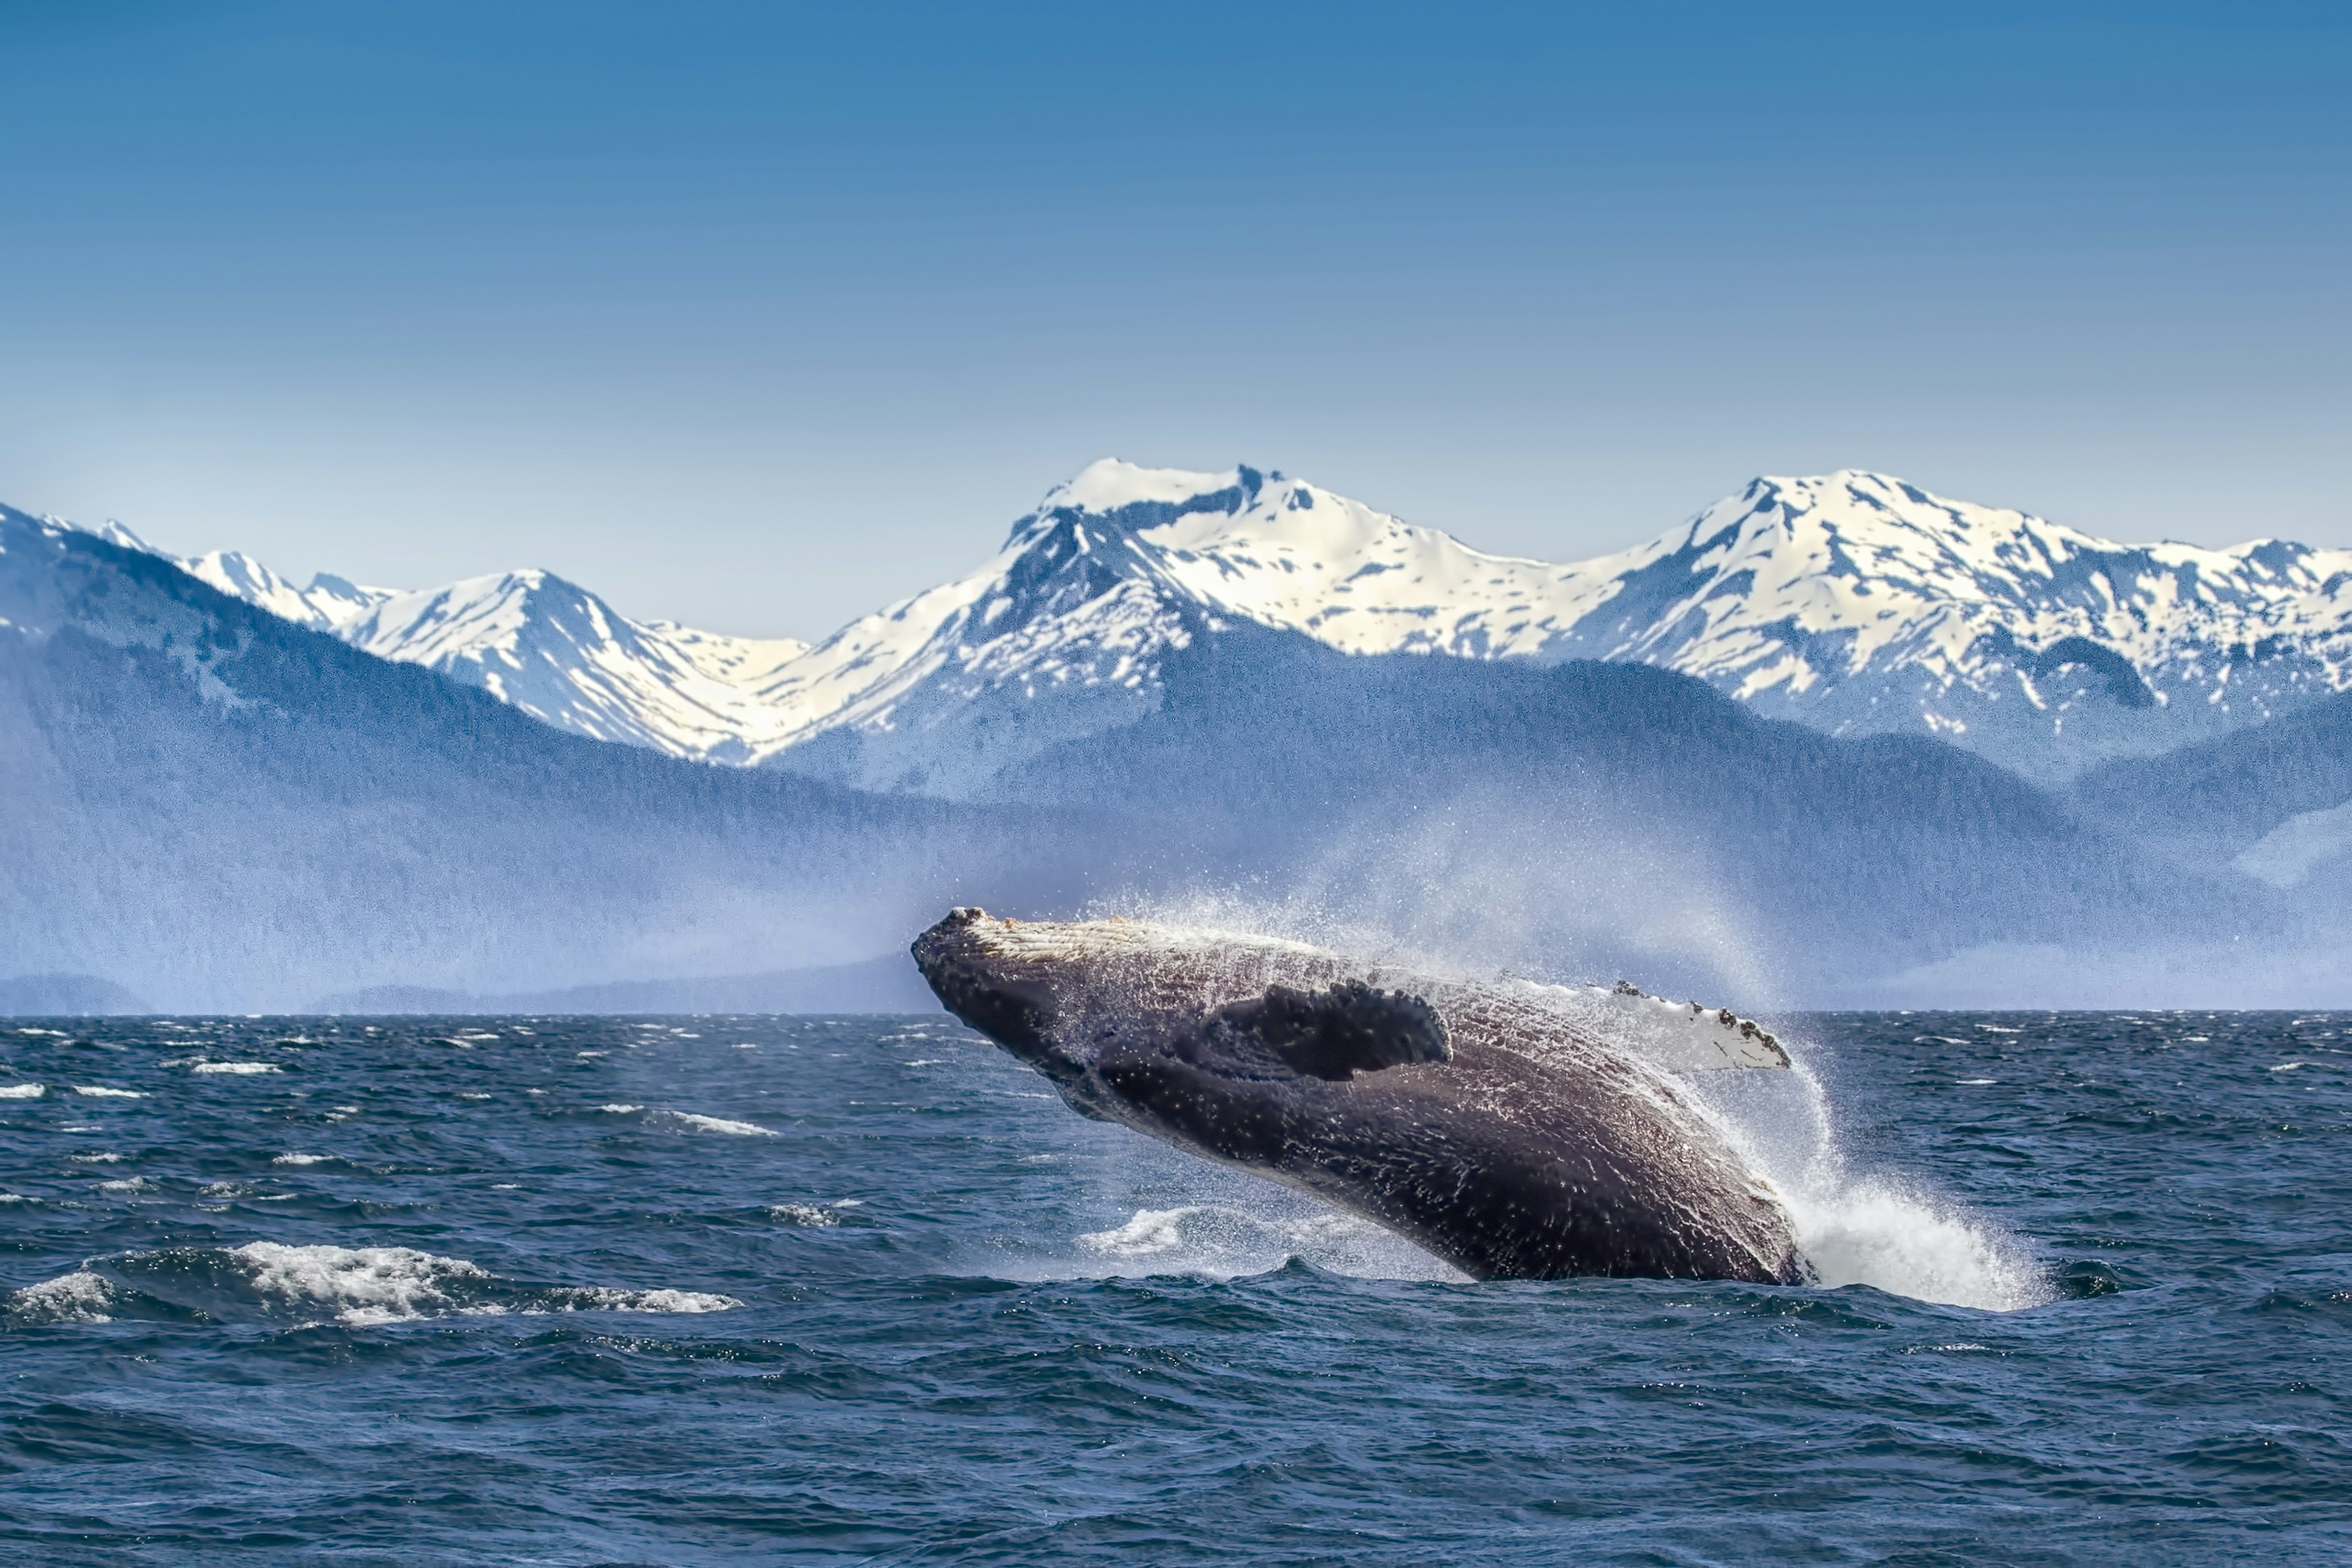 A dark grey humpback whale with a white underbelly breaches backwards out of the deep blue waters of Glacier Bay, surrounded by whitecaps and spray. In the background, jagged snow-capped peaks rise dramatically from the horizon, the hills in the midground almost the same denim blue as the sky. Scuba diving in national parks